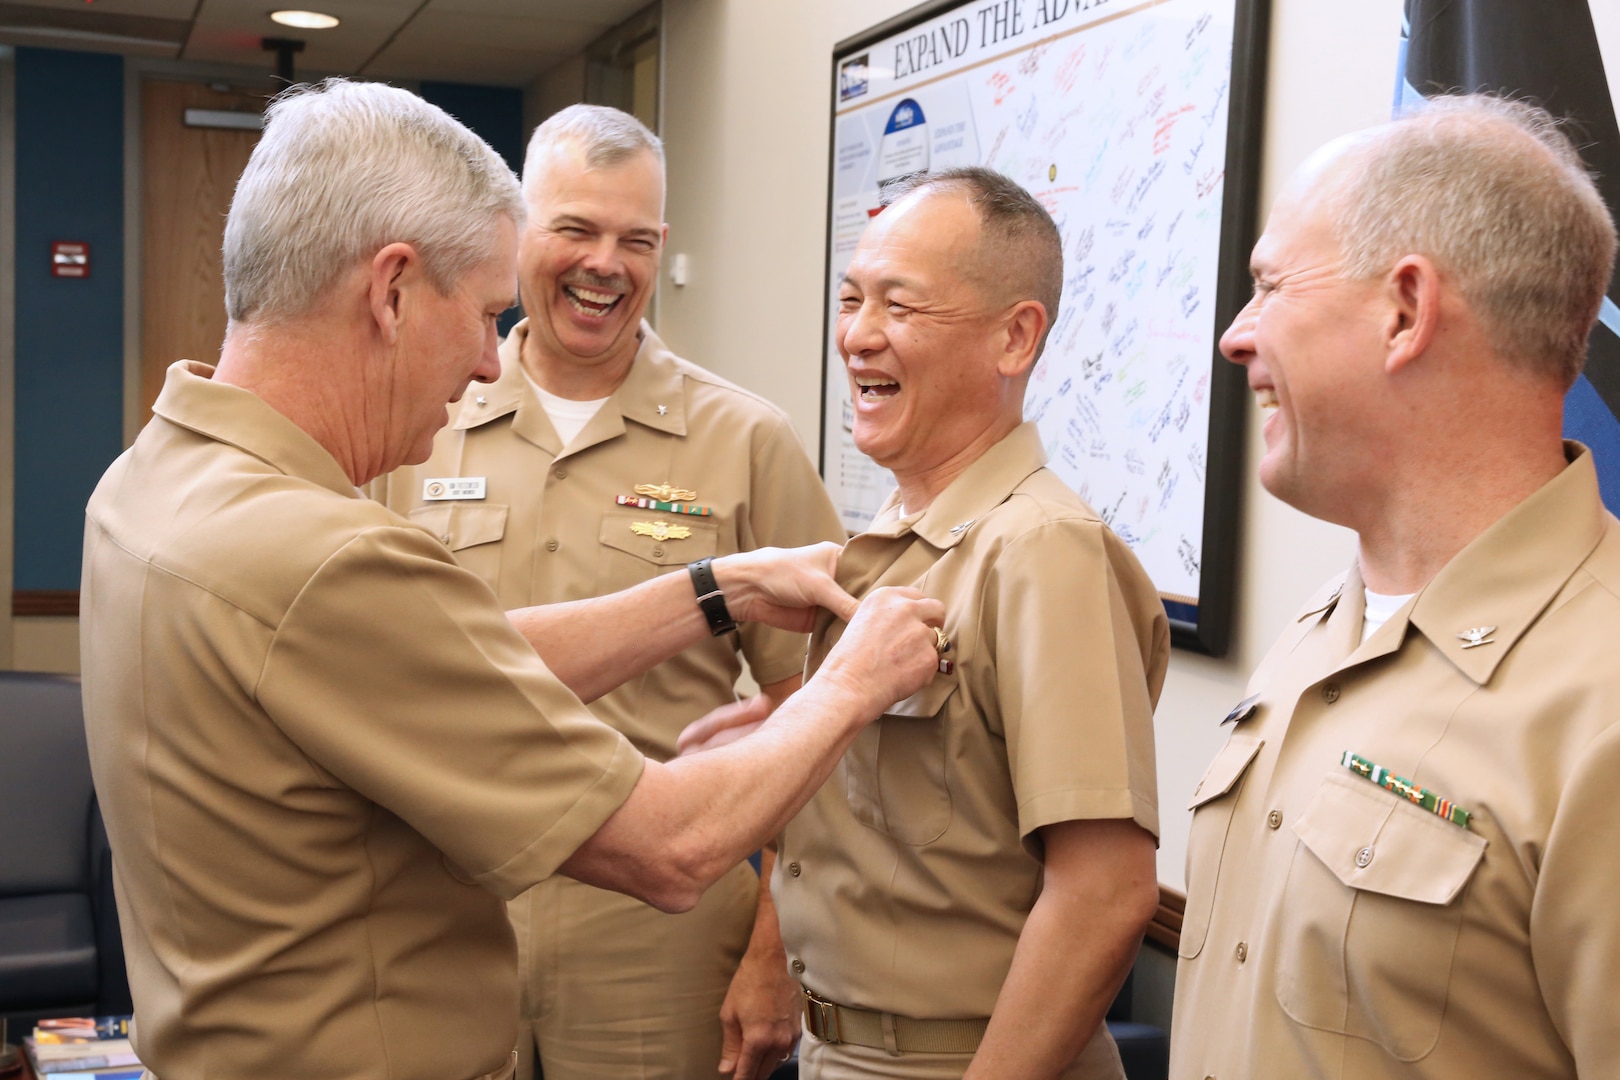 Vice Adm. Tom Moore pins Capt. Huan Nguyen, deputy chief information officer, NAVSEA;  with an Engineering Duty Officer (EDO) qualification insignia as recently pinned Rear Adm. Ronald Fritzemeier, Space and Naval Warfare Systems Command (SPAWAR) chief engineer;  and soon to be pinned Capt. Mark Mclean, principal acquisition program manager with Acquisition and Finance, Program Executive Office Littoral Combat Ships.